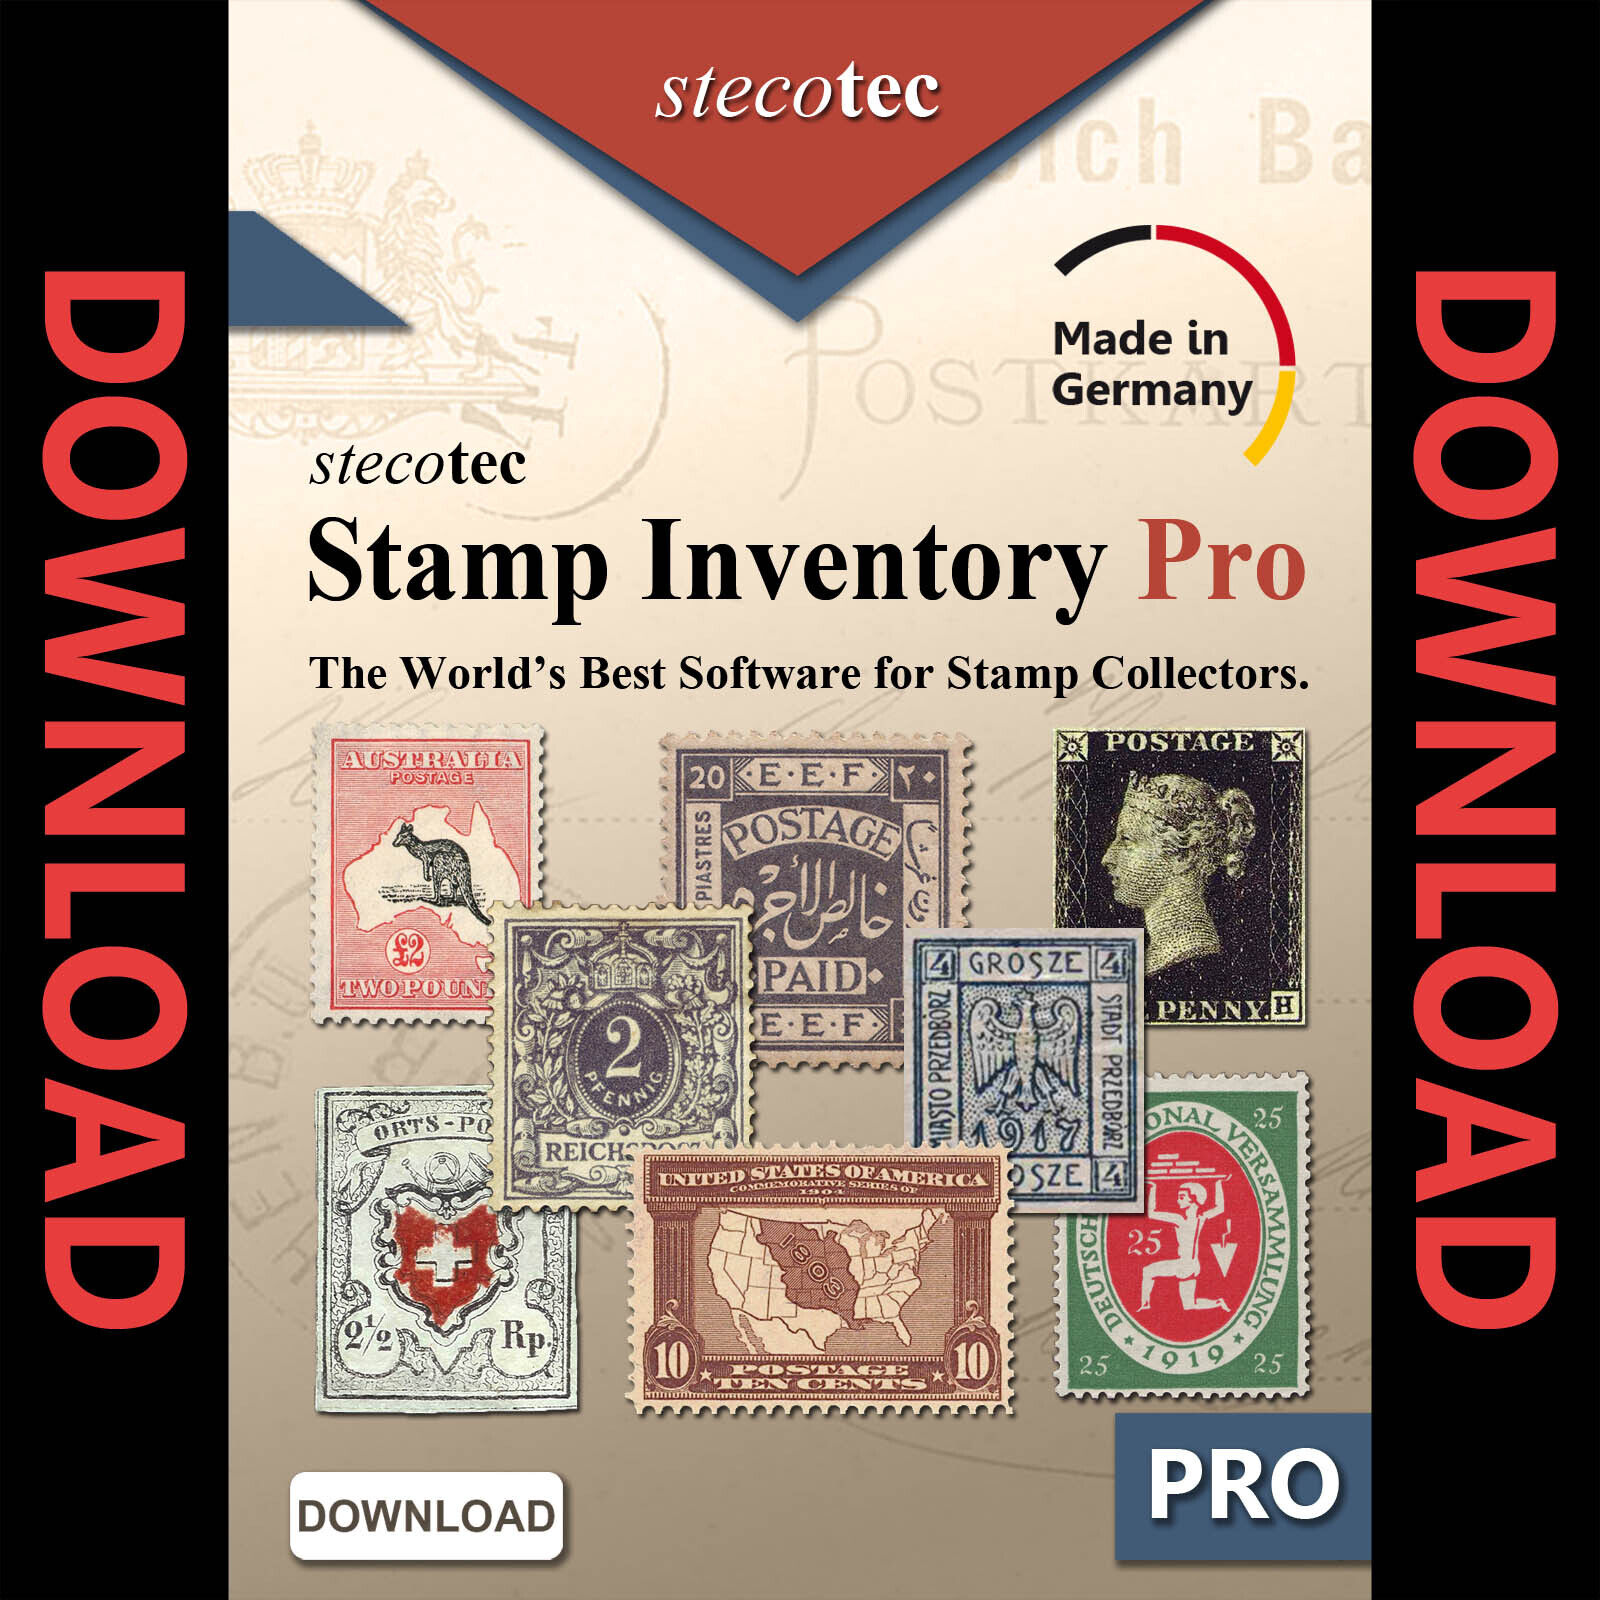 Stecotec Stamp Inventory Pro - The collecting software for stamp collectors